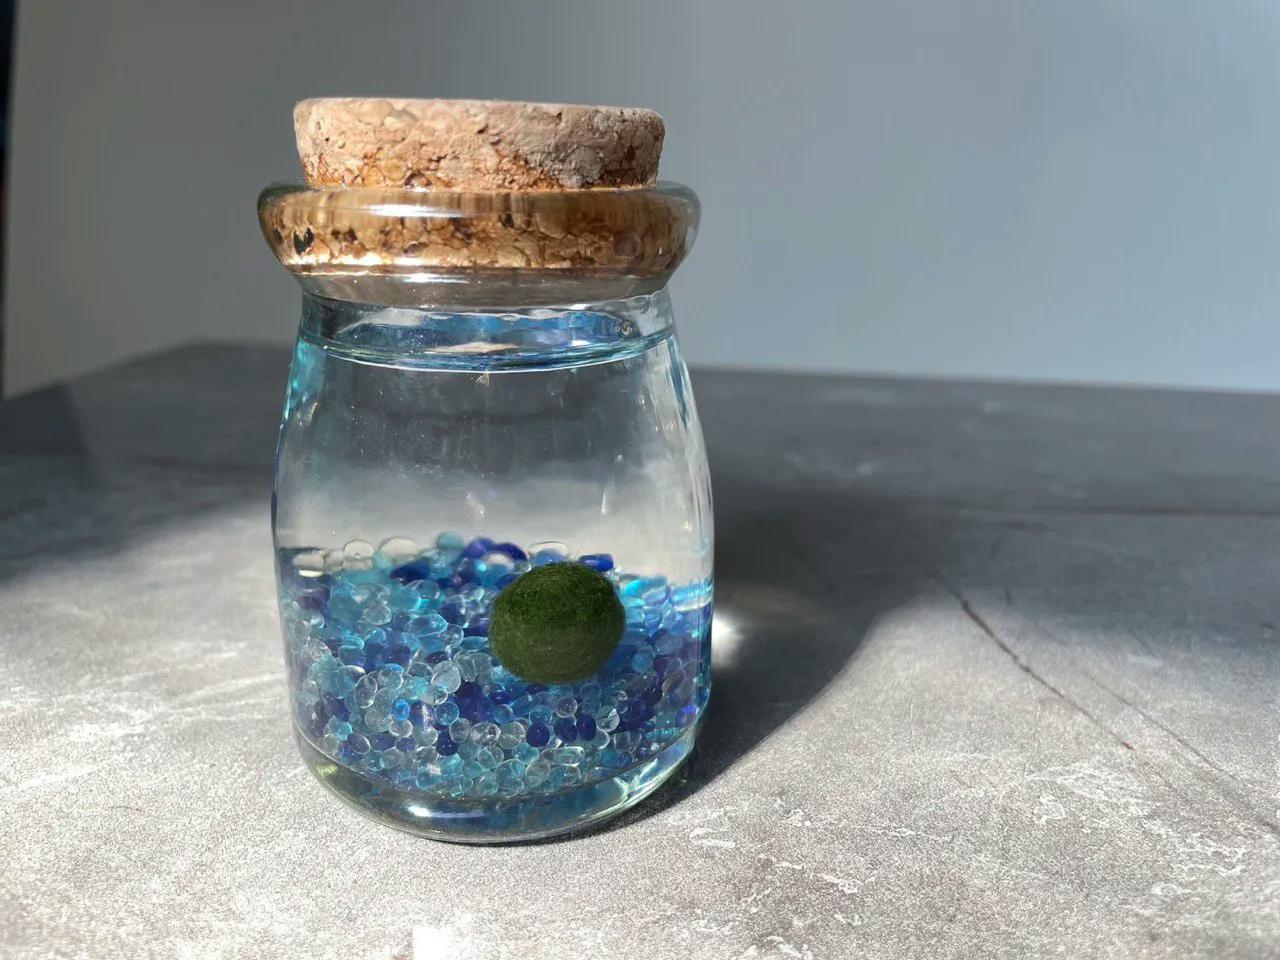 Marimo (Moss Balls): Care Guide, Tips and Info